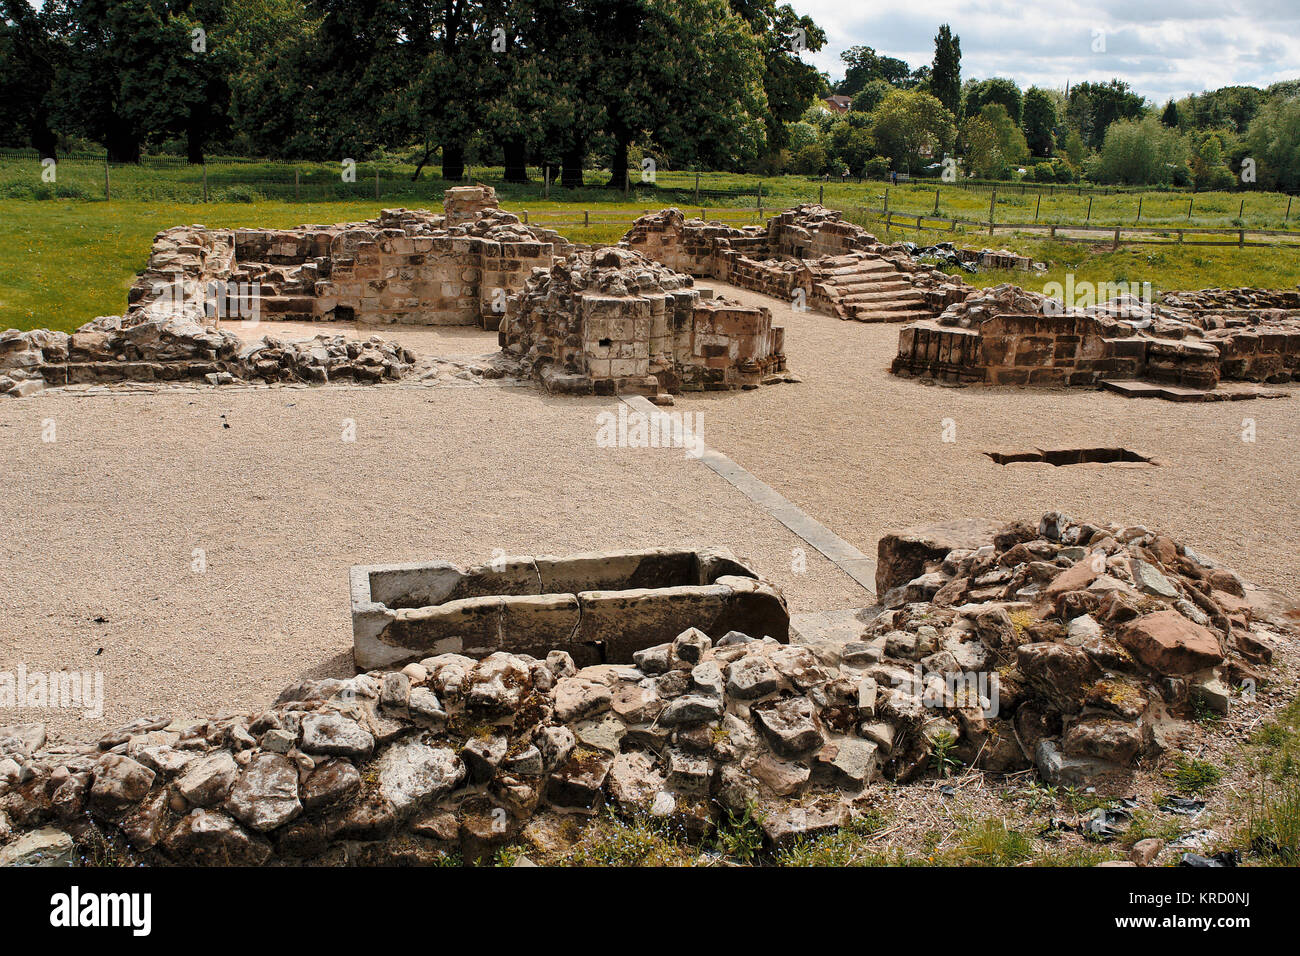 Part of the foundations of Bordesley Abbey in Redditch, Worcestershire.  The Abbey was founded by Cistercian monks in 1140, and included the abbey church and cemetery, farms, metalworking watermills and workshops.       Date: 2009 Stock Photo